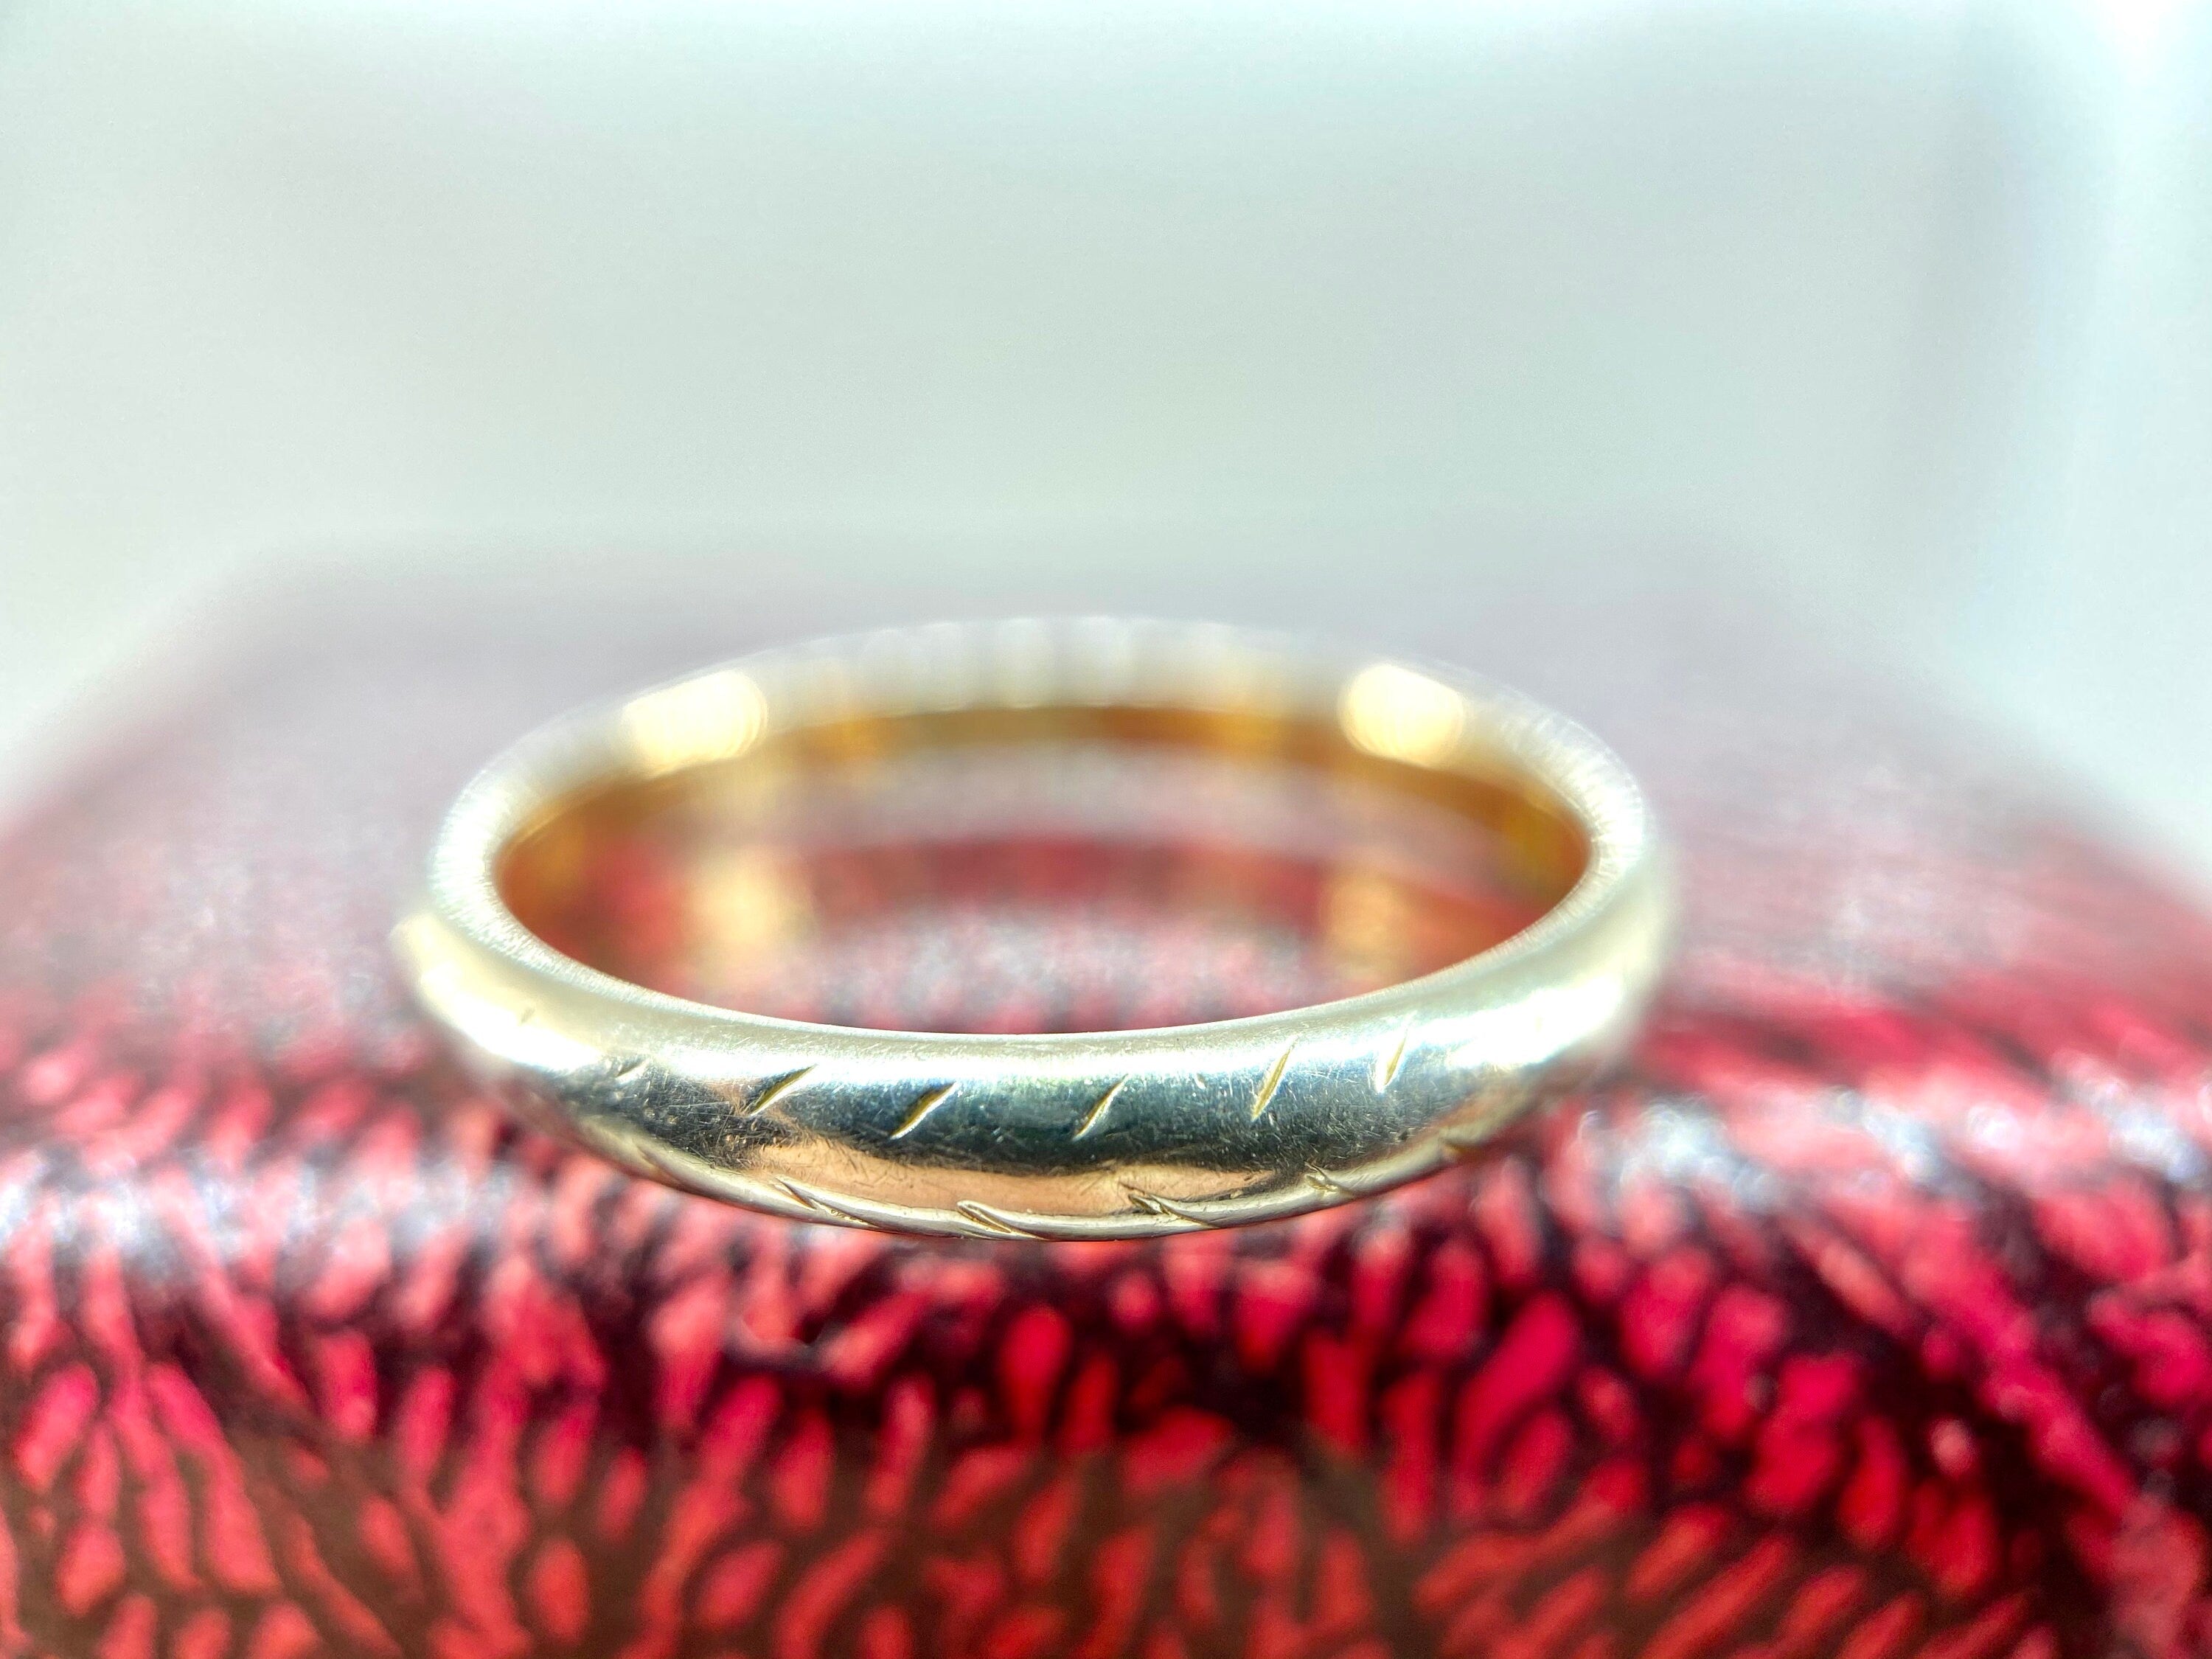 JR Wood Two Tone Gold Ring, Vintage, Size 5.5